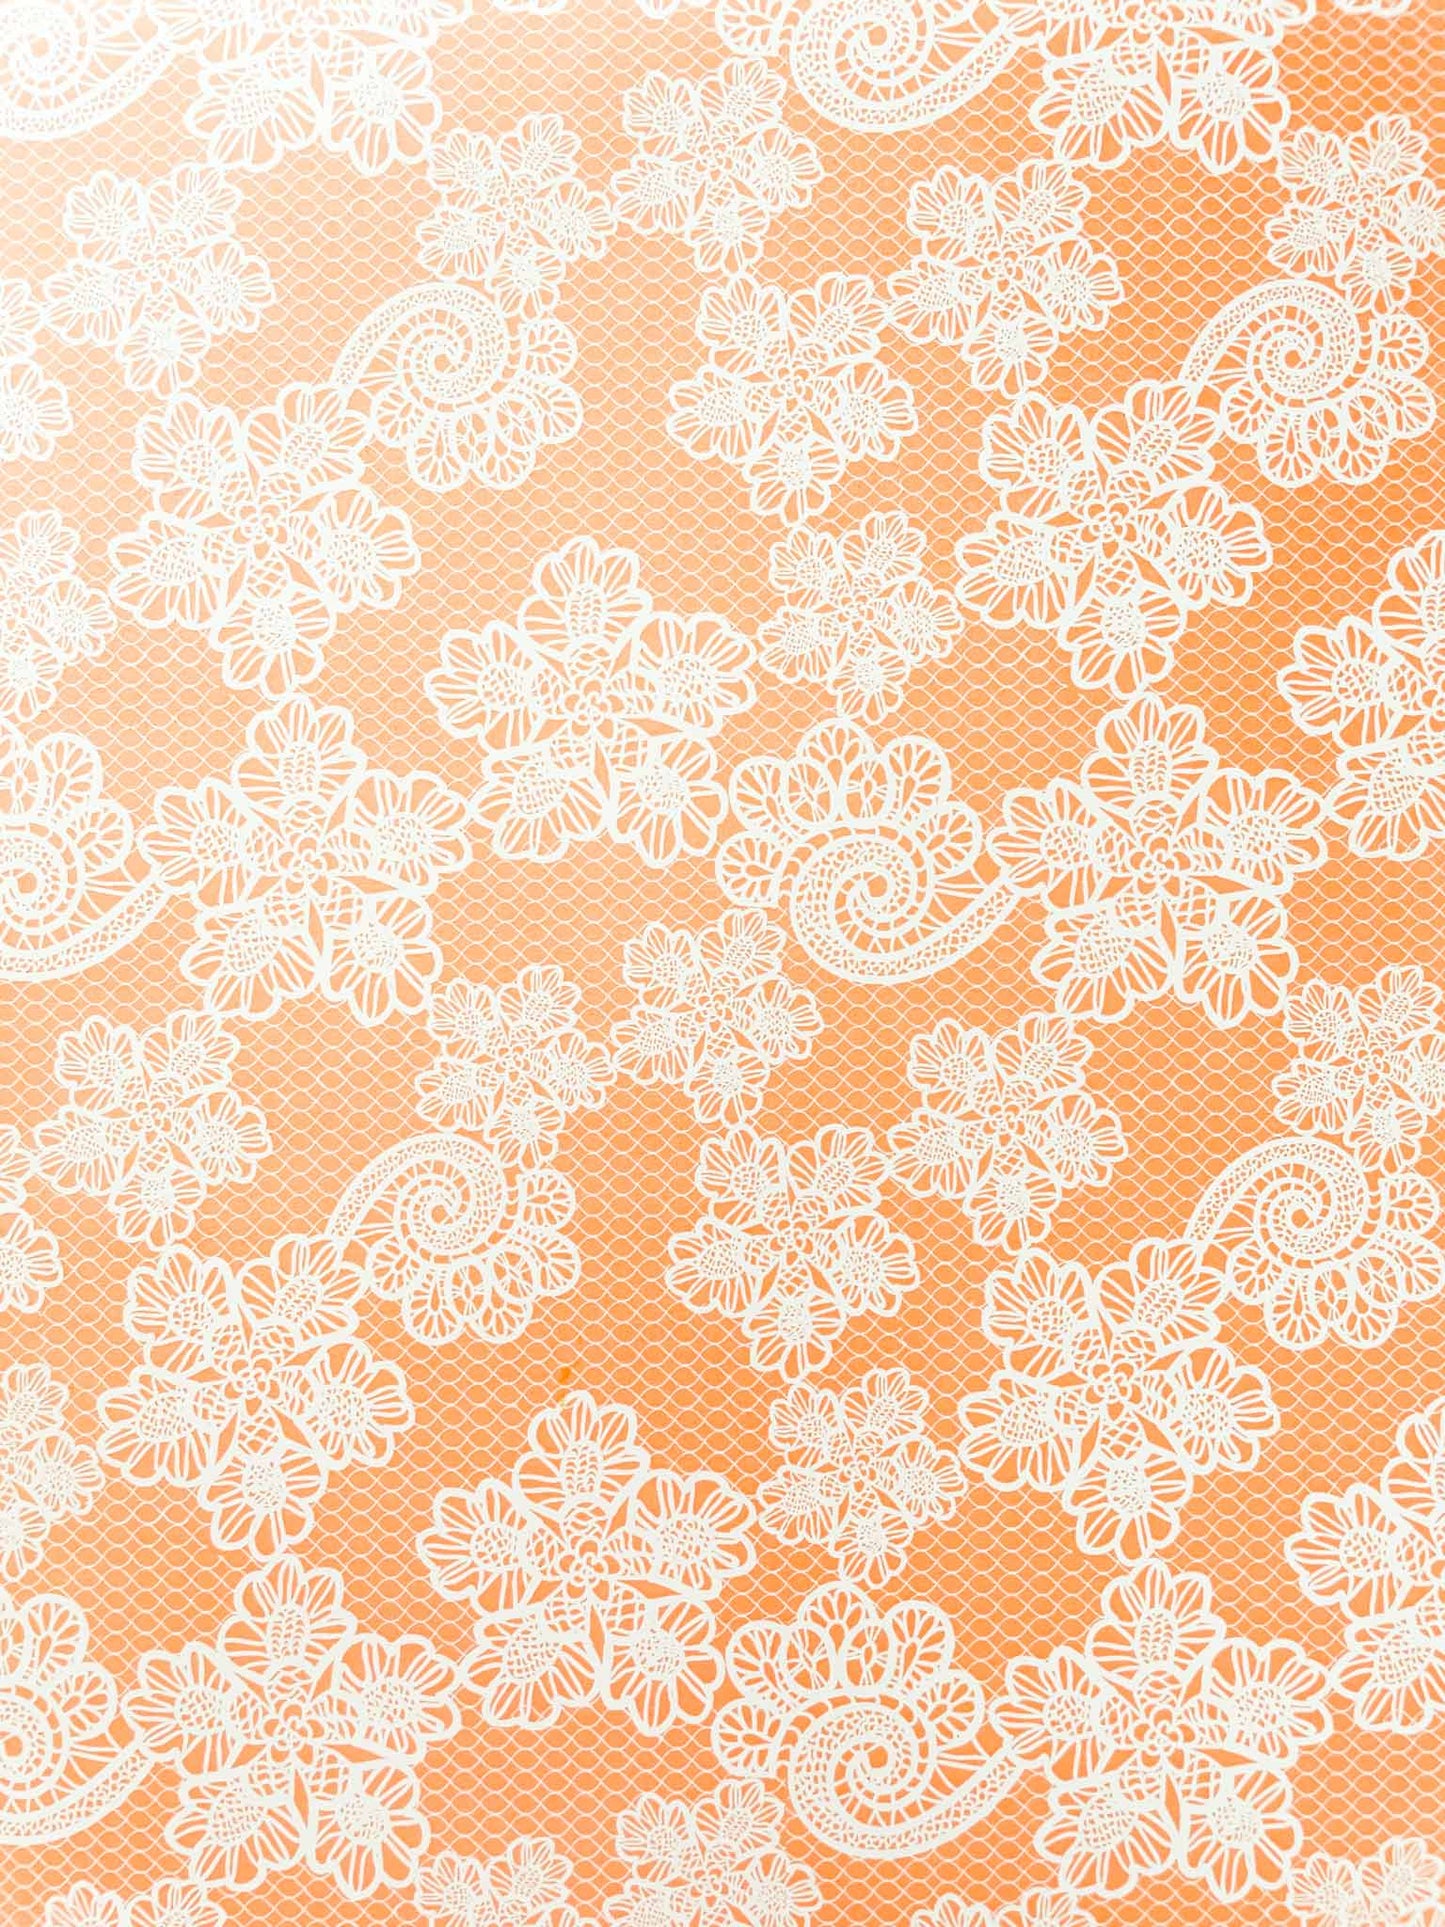 pale-orange-and-white-lace-pattern-craft-paper